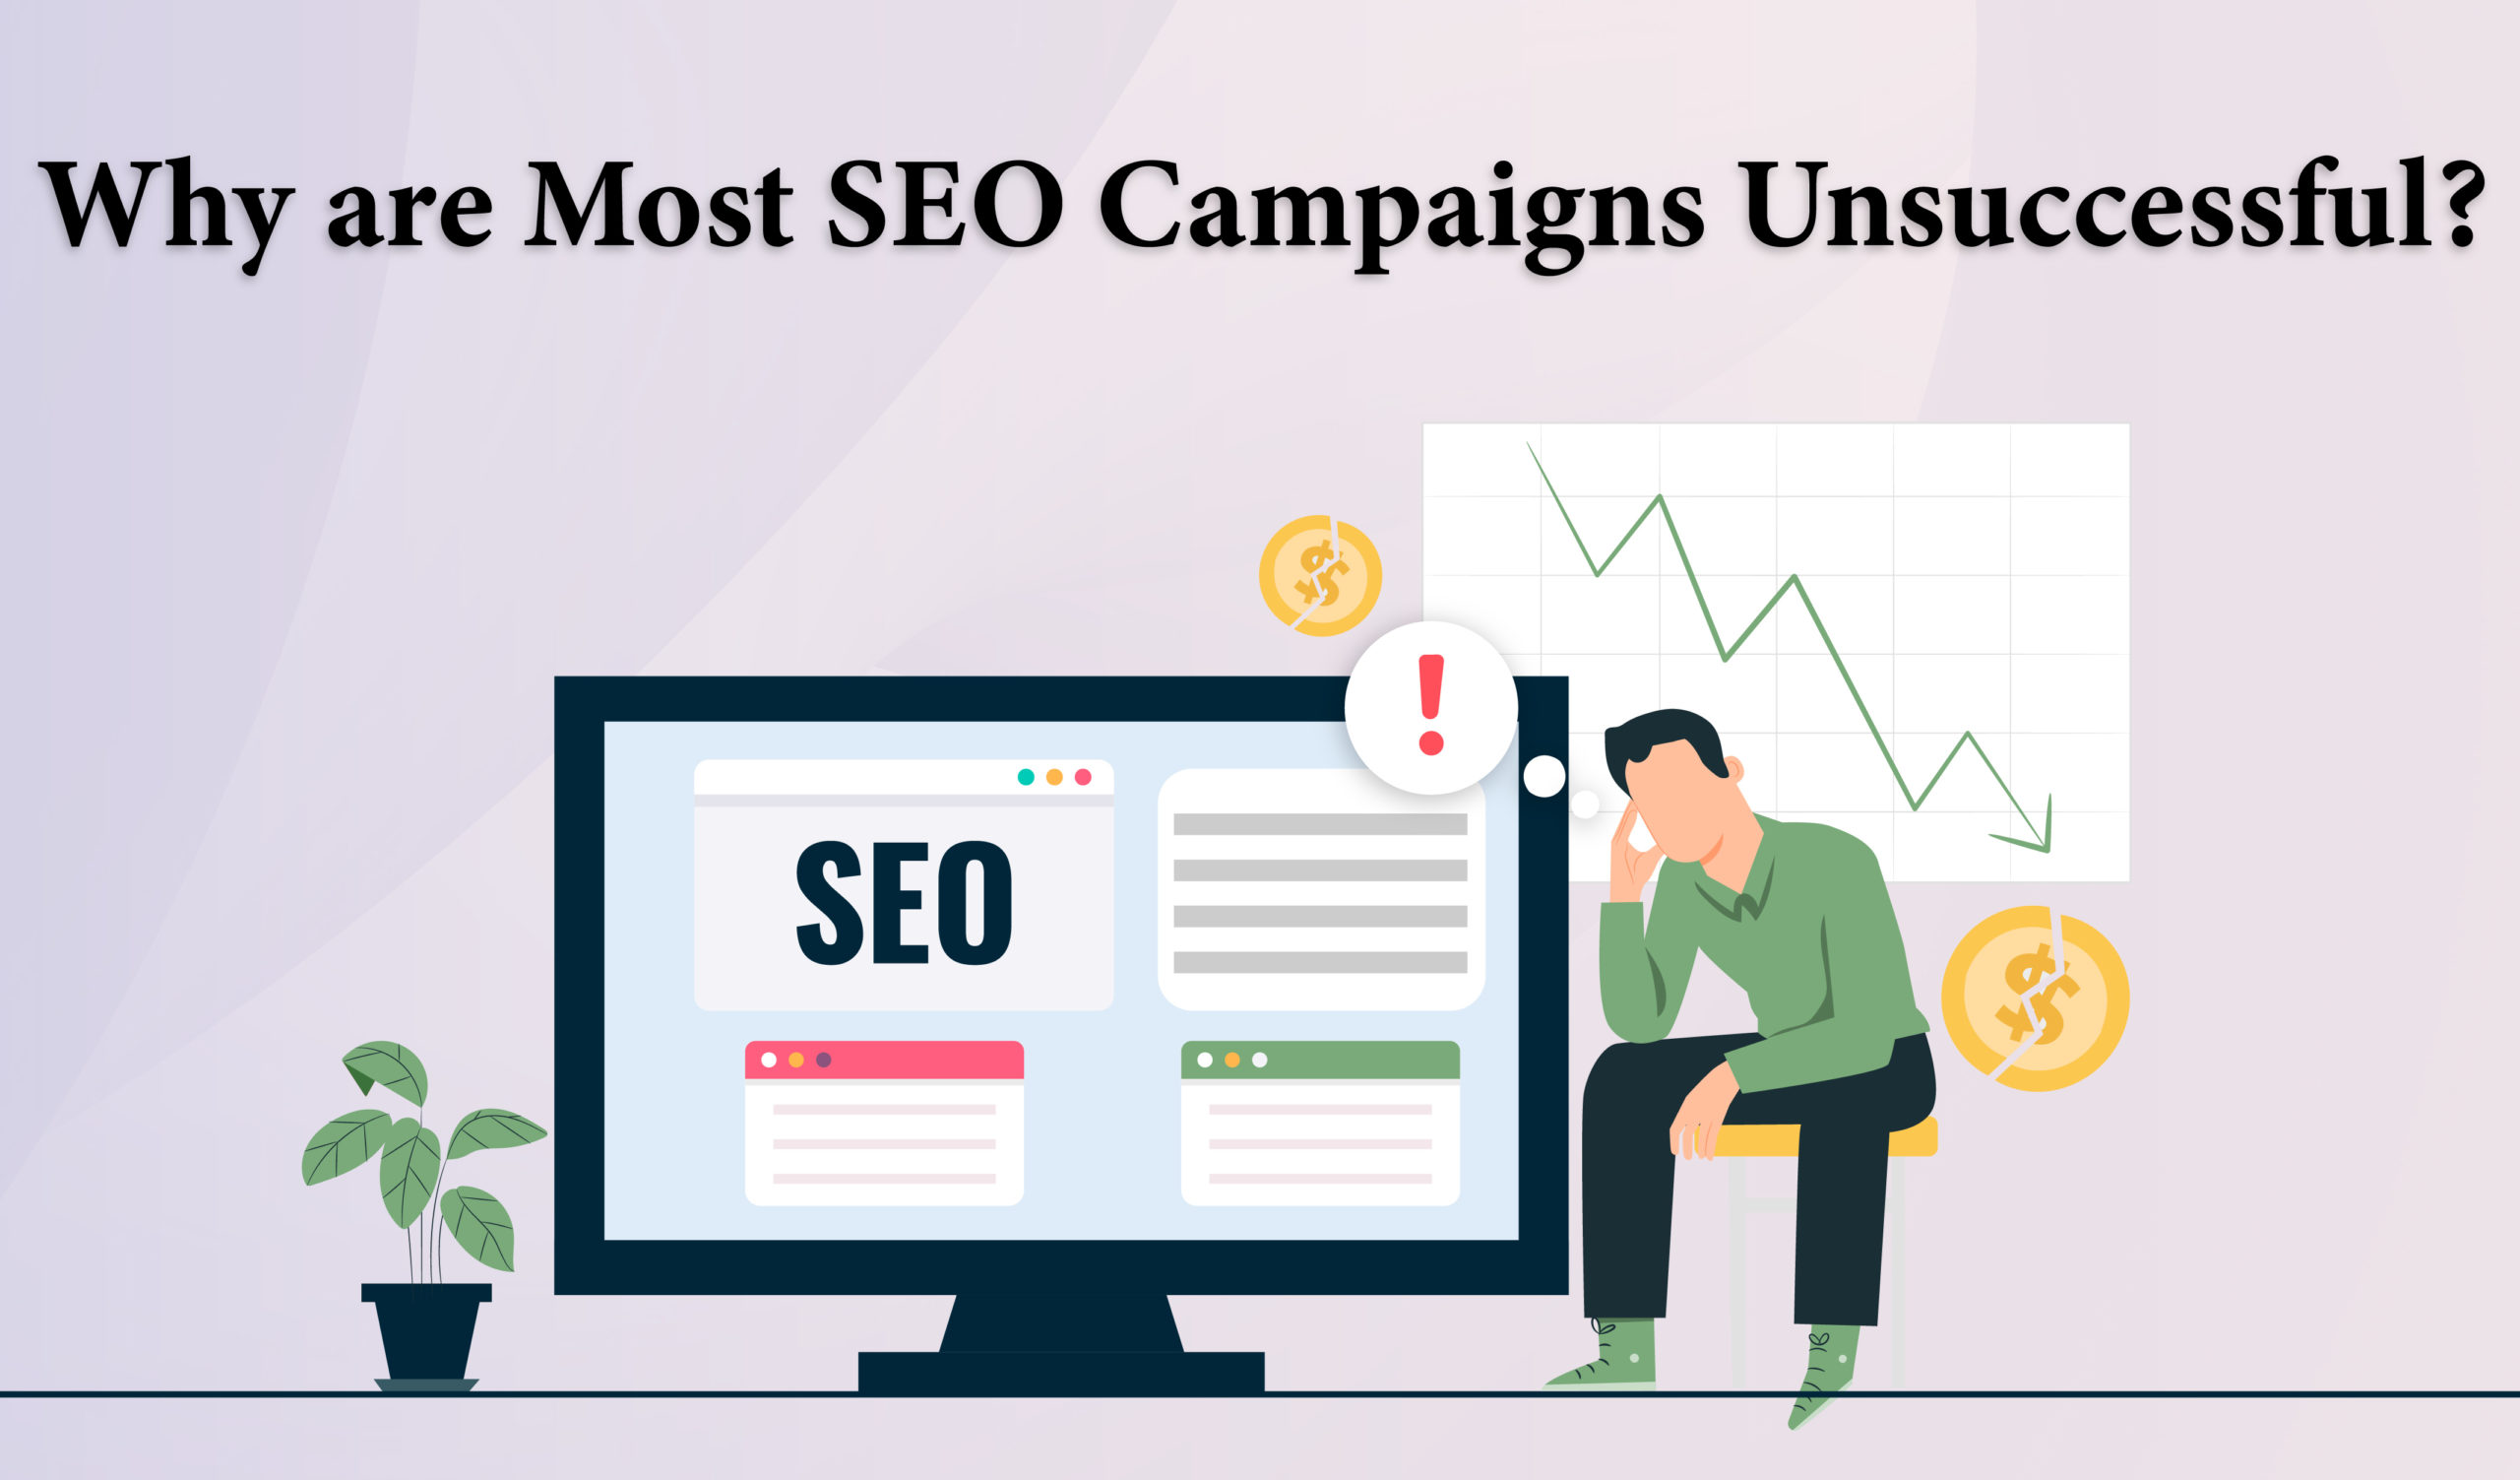 Why are most SEO Campaigns unsuccessful?